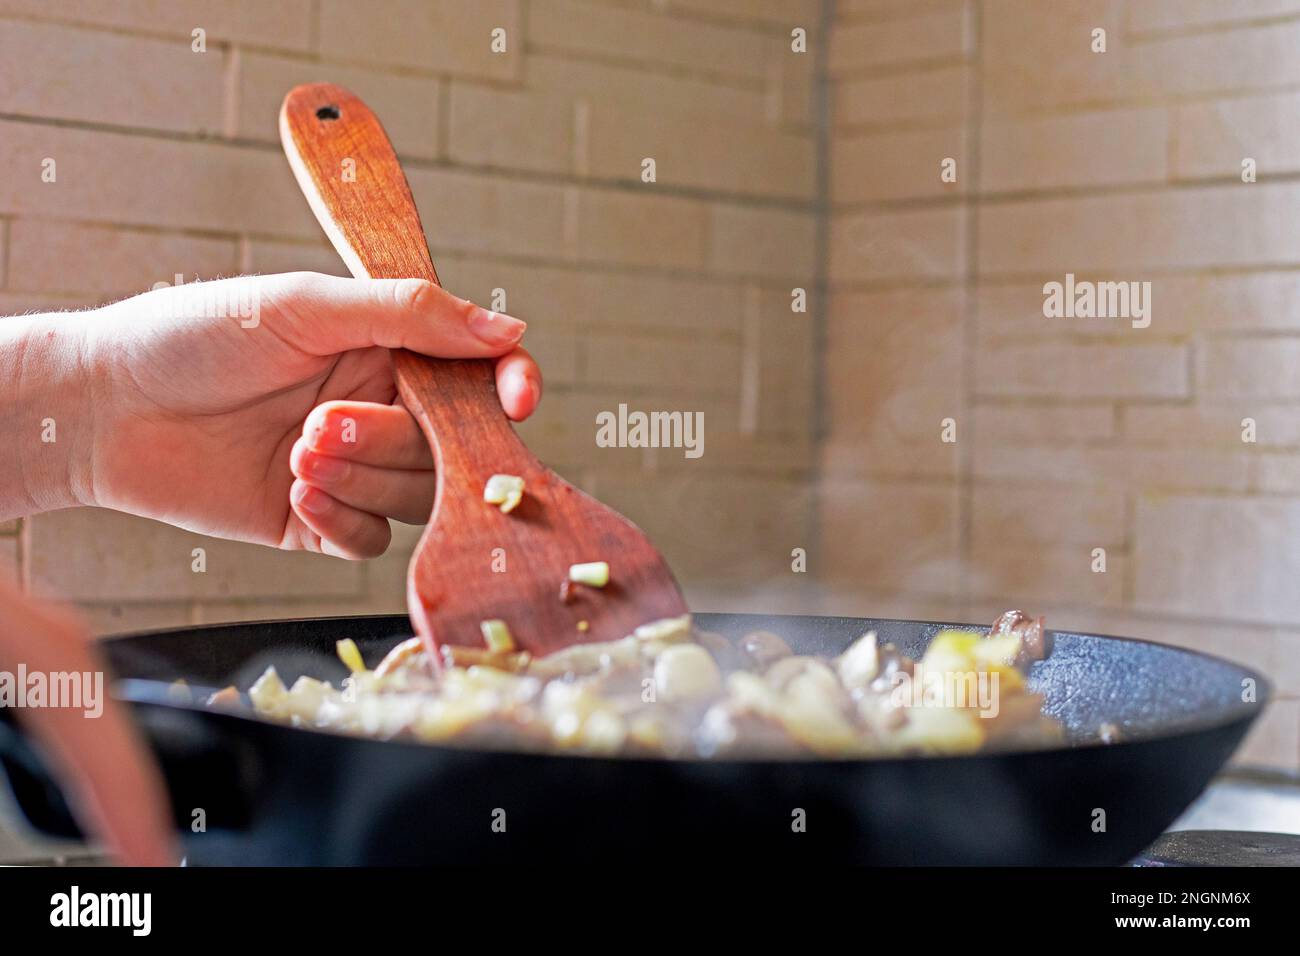 prepare a homemade dinner and mix vegetables and mushrooms in a hot pan with a wooden kitchen spatula. Diet Stock Photo